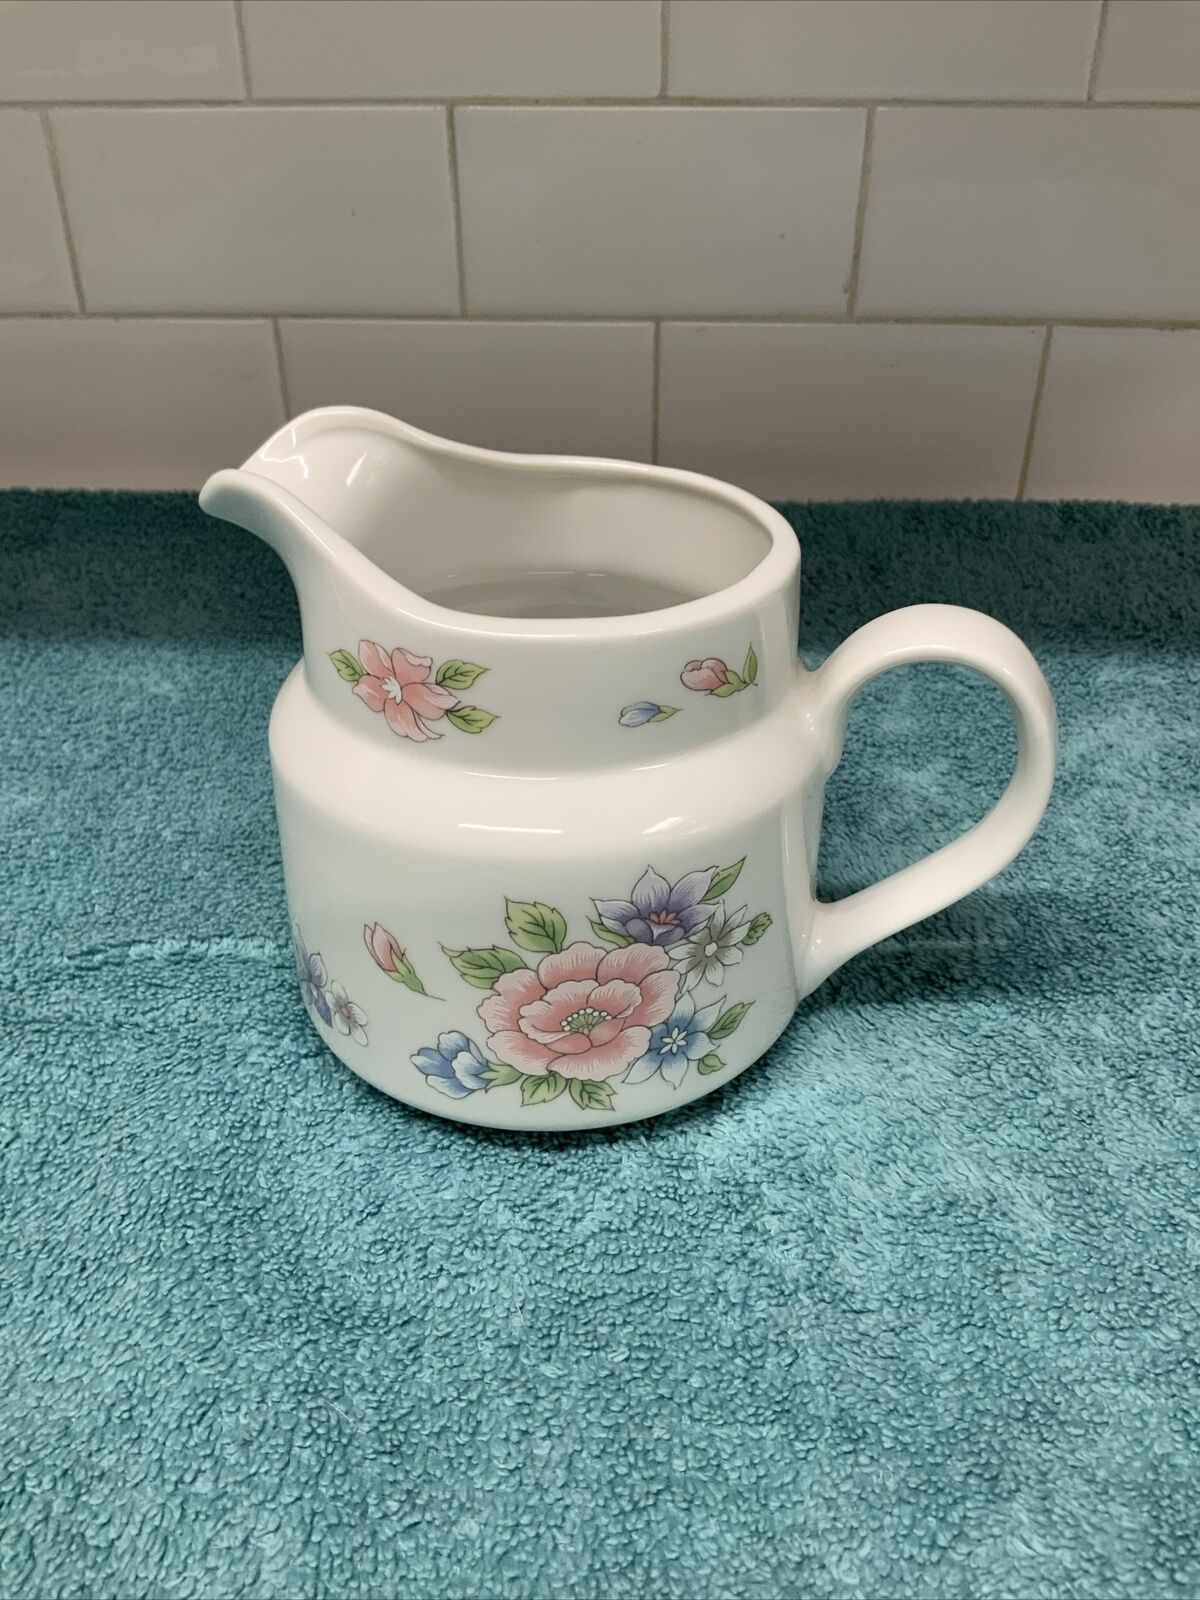 1989 Vintage  FTD Small Floral Pitcher “Especially for you”